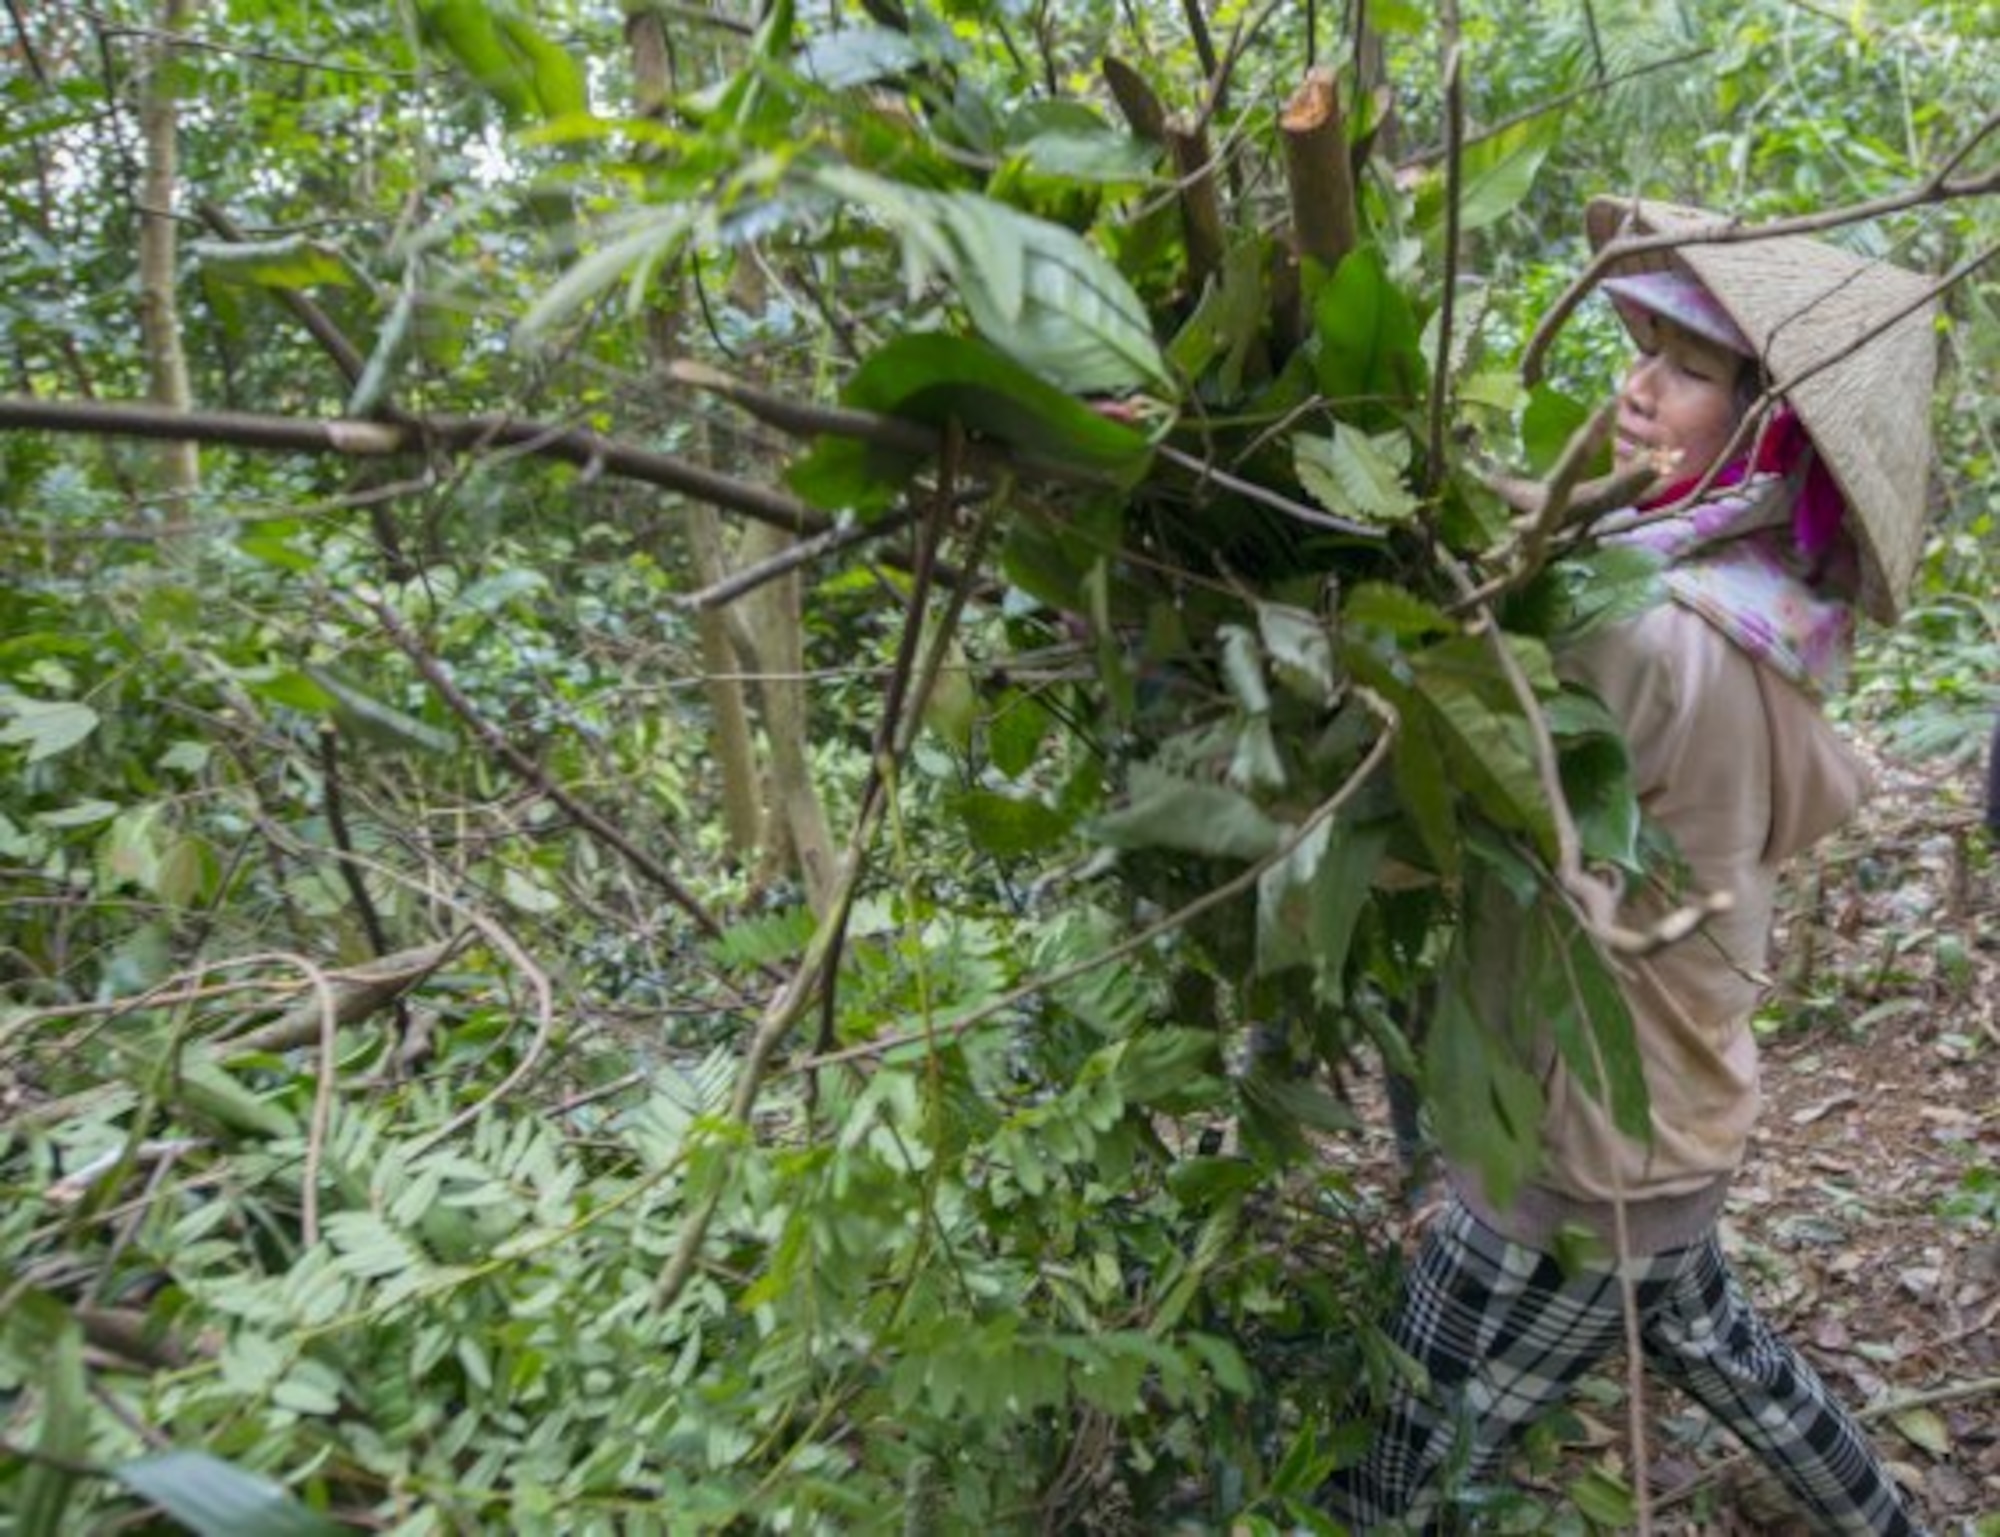 A Vietnamese worker clears jungle vegetation from an excavation site March 17, 2018, in Quang Ngai province, Vietnam, where an American pilot crashed during the Vietnam War. (U.S. Army photo by Sean Kimmons)